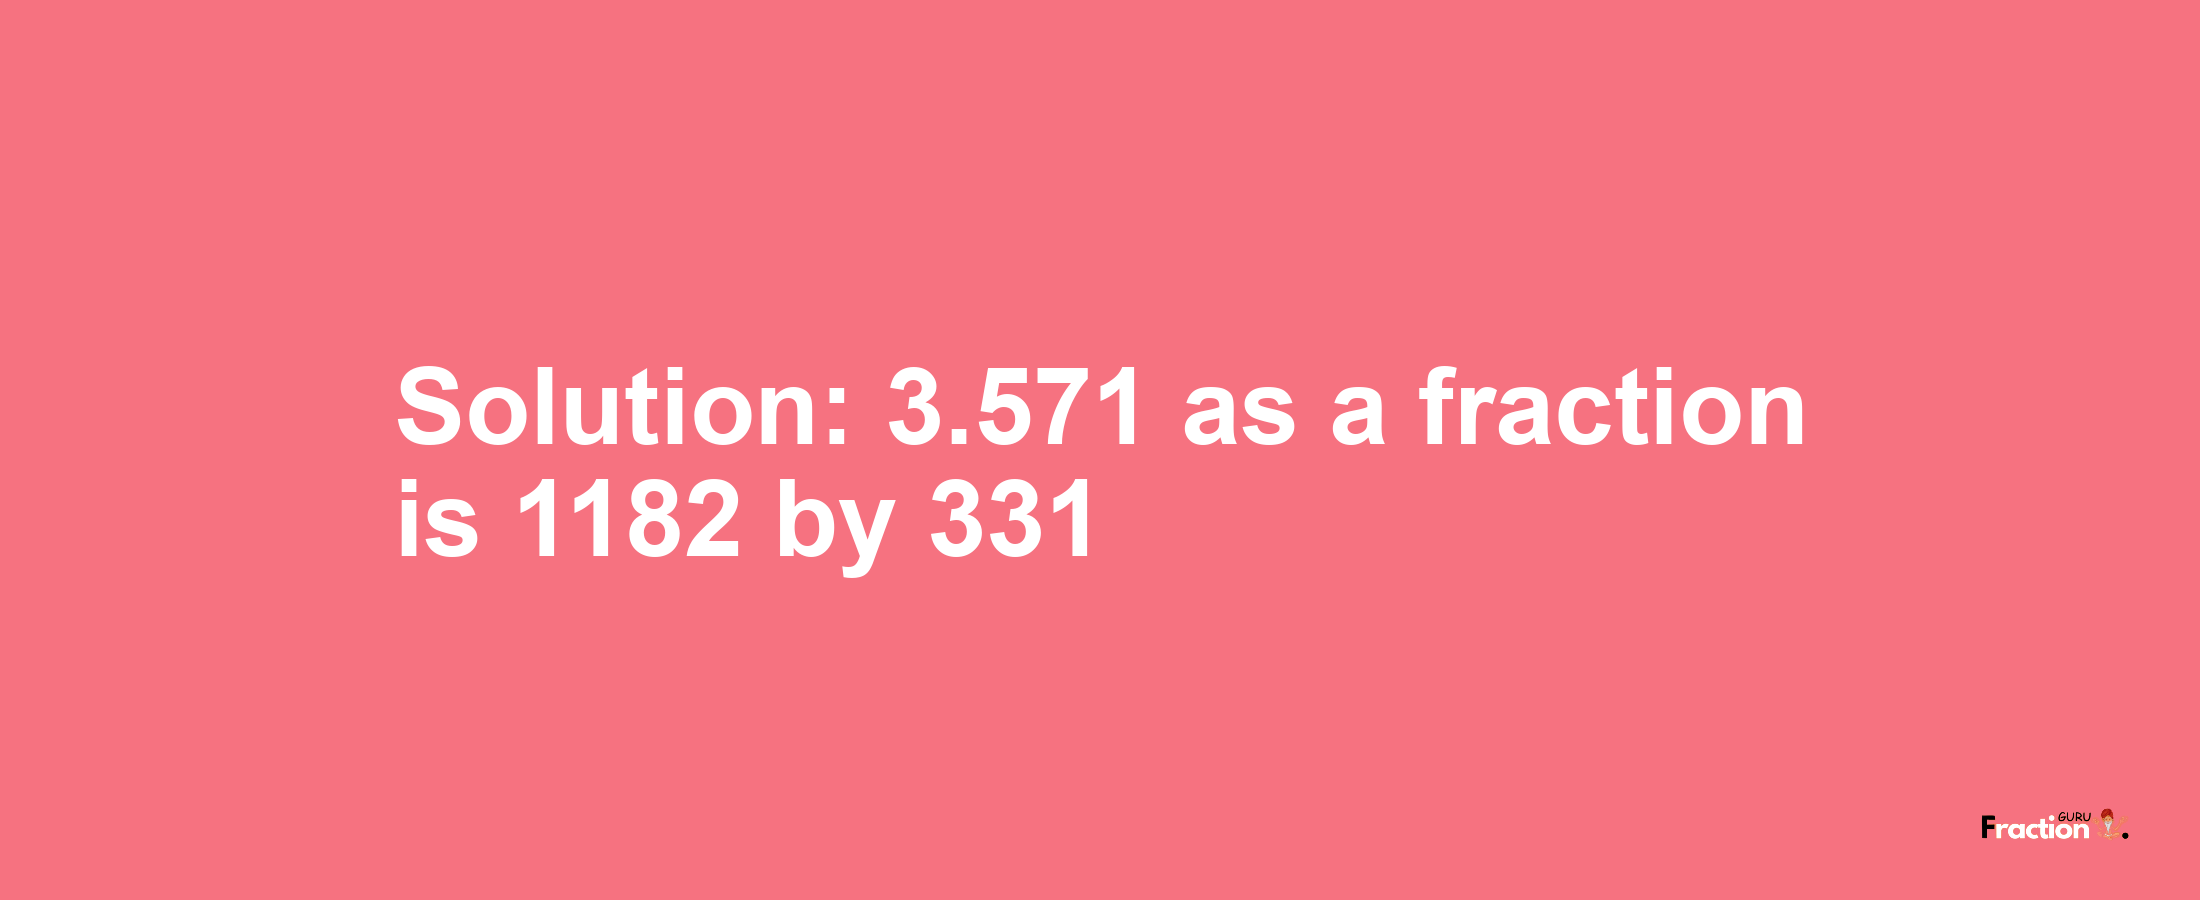 Solution:3.571 as a fraction is 1182/331